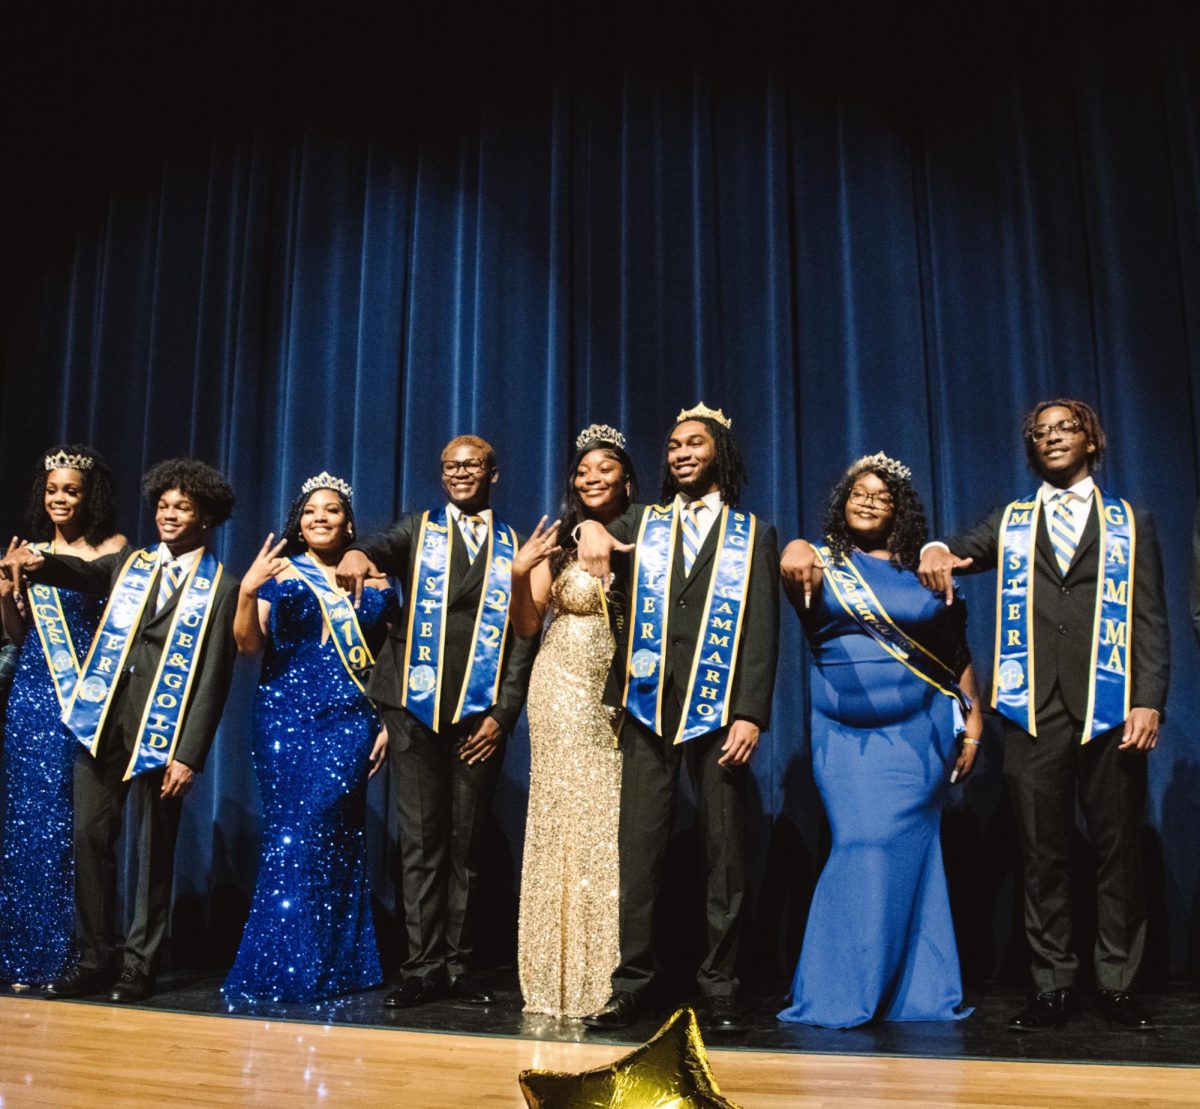 Sigma Gamma Rho Sorority Inc. crown the new misters for their royal court for the Gamma chapter